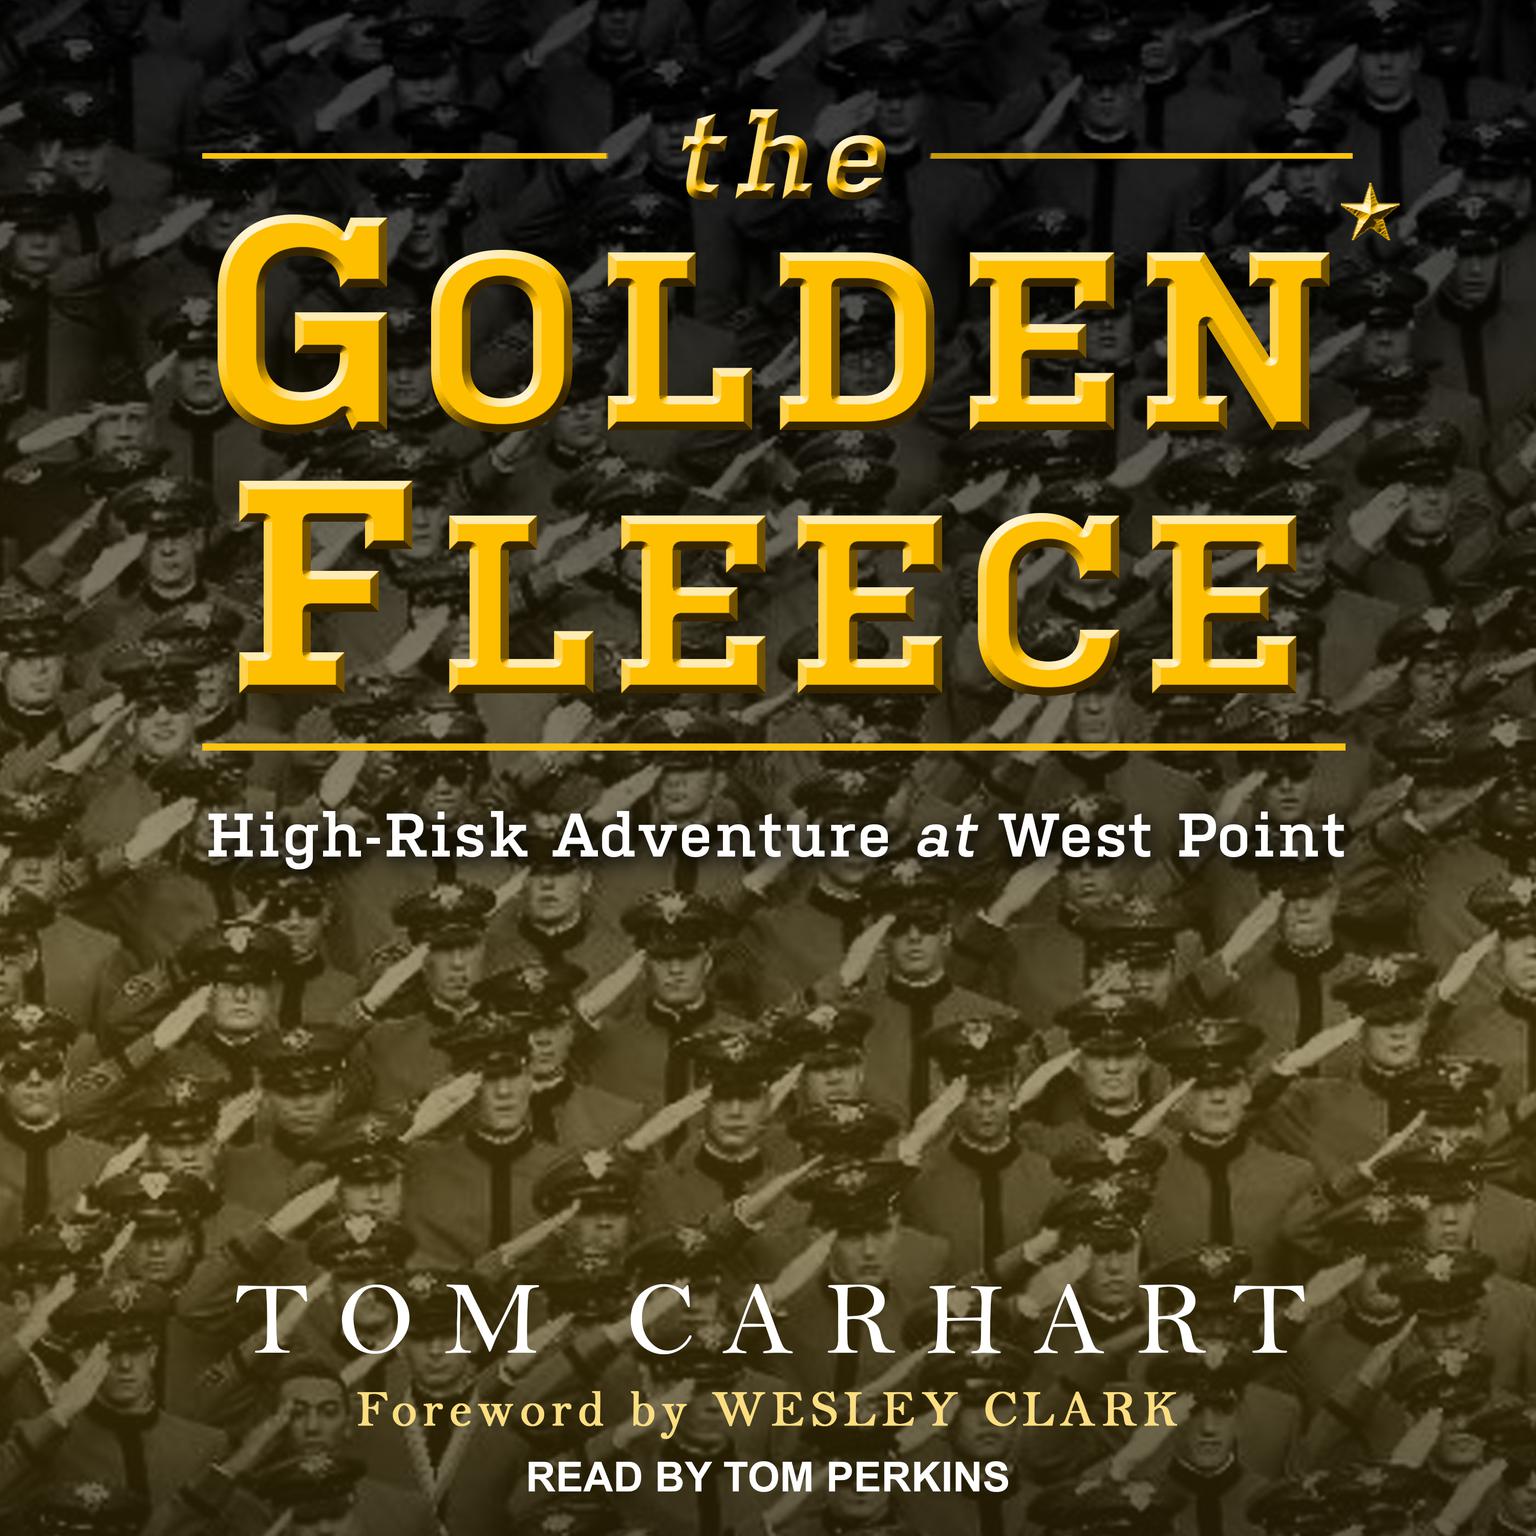 The Golden Fleece: High-Risk Adventure at West Point Audiobook, by Tom Carhart